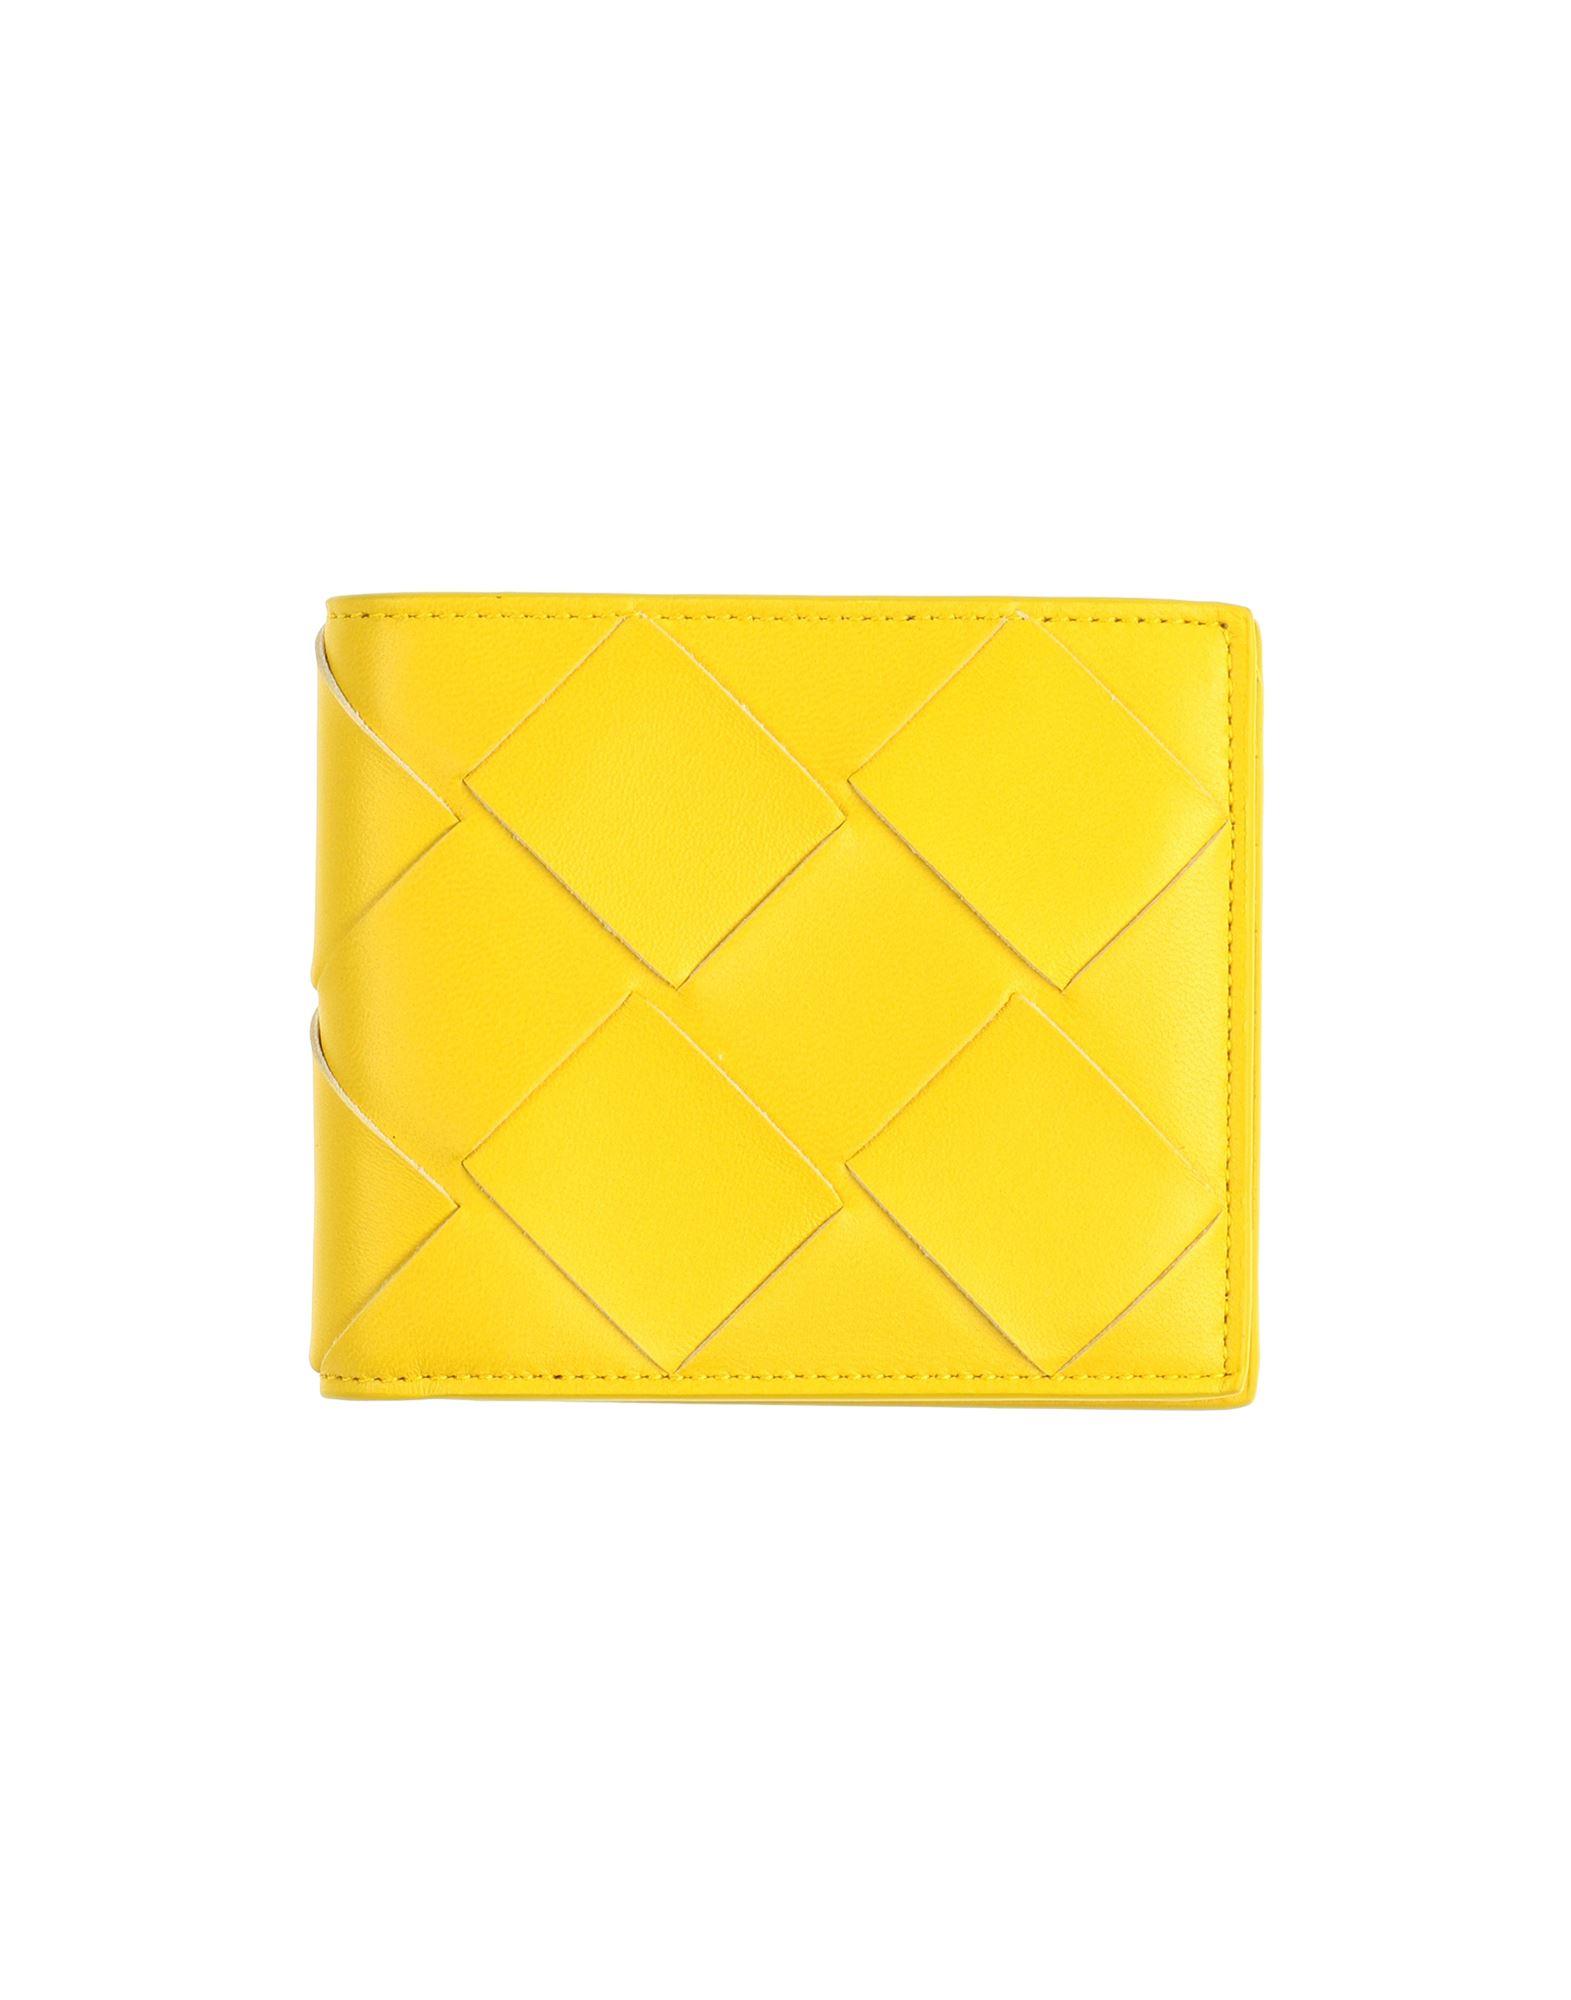 BRUCLE Yellow and Grey Men's Wallet